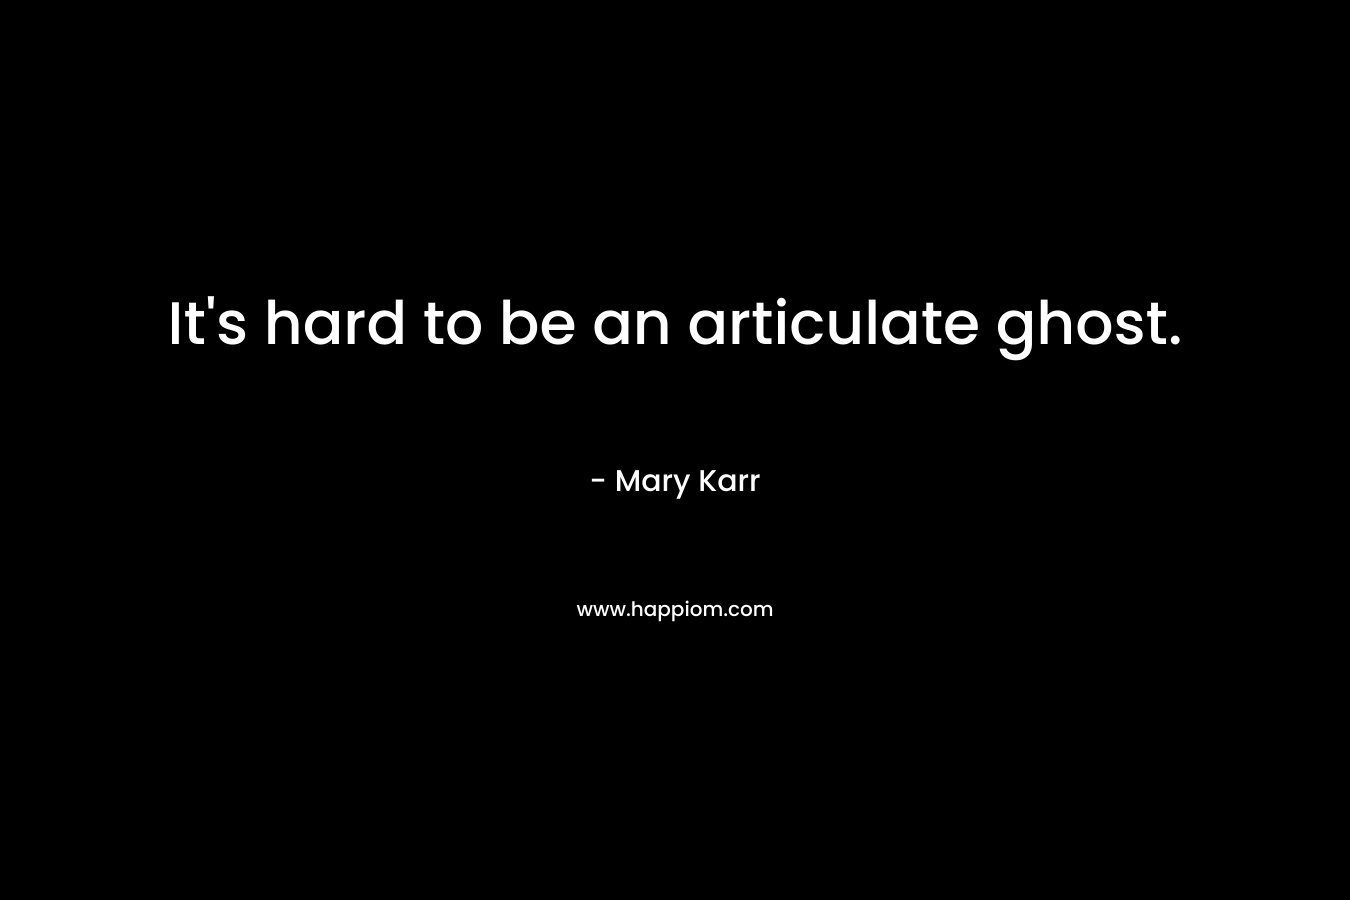 It’s hard to be an articulate ghost. – Mary Karr